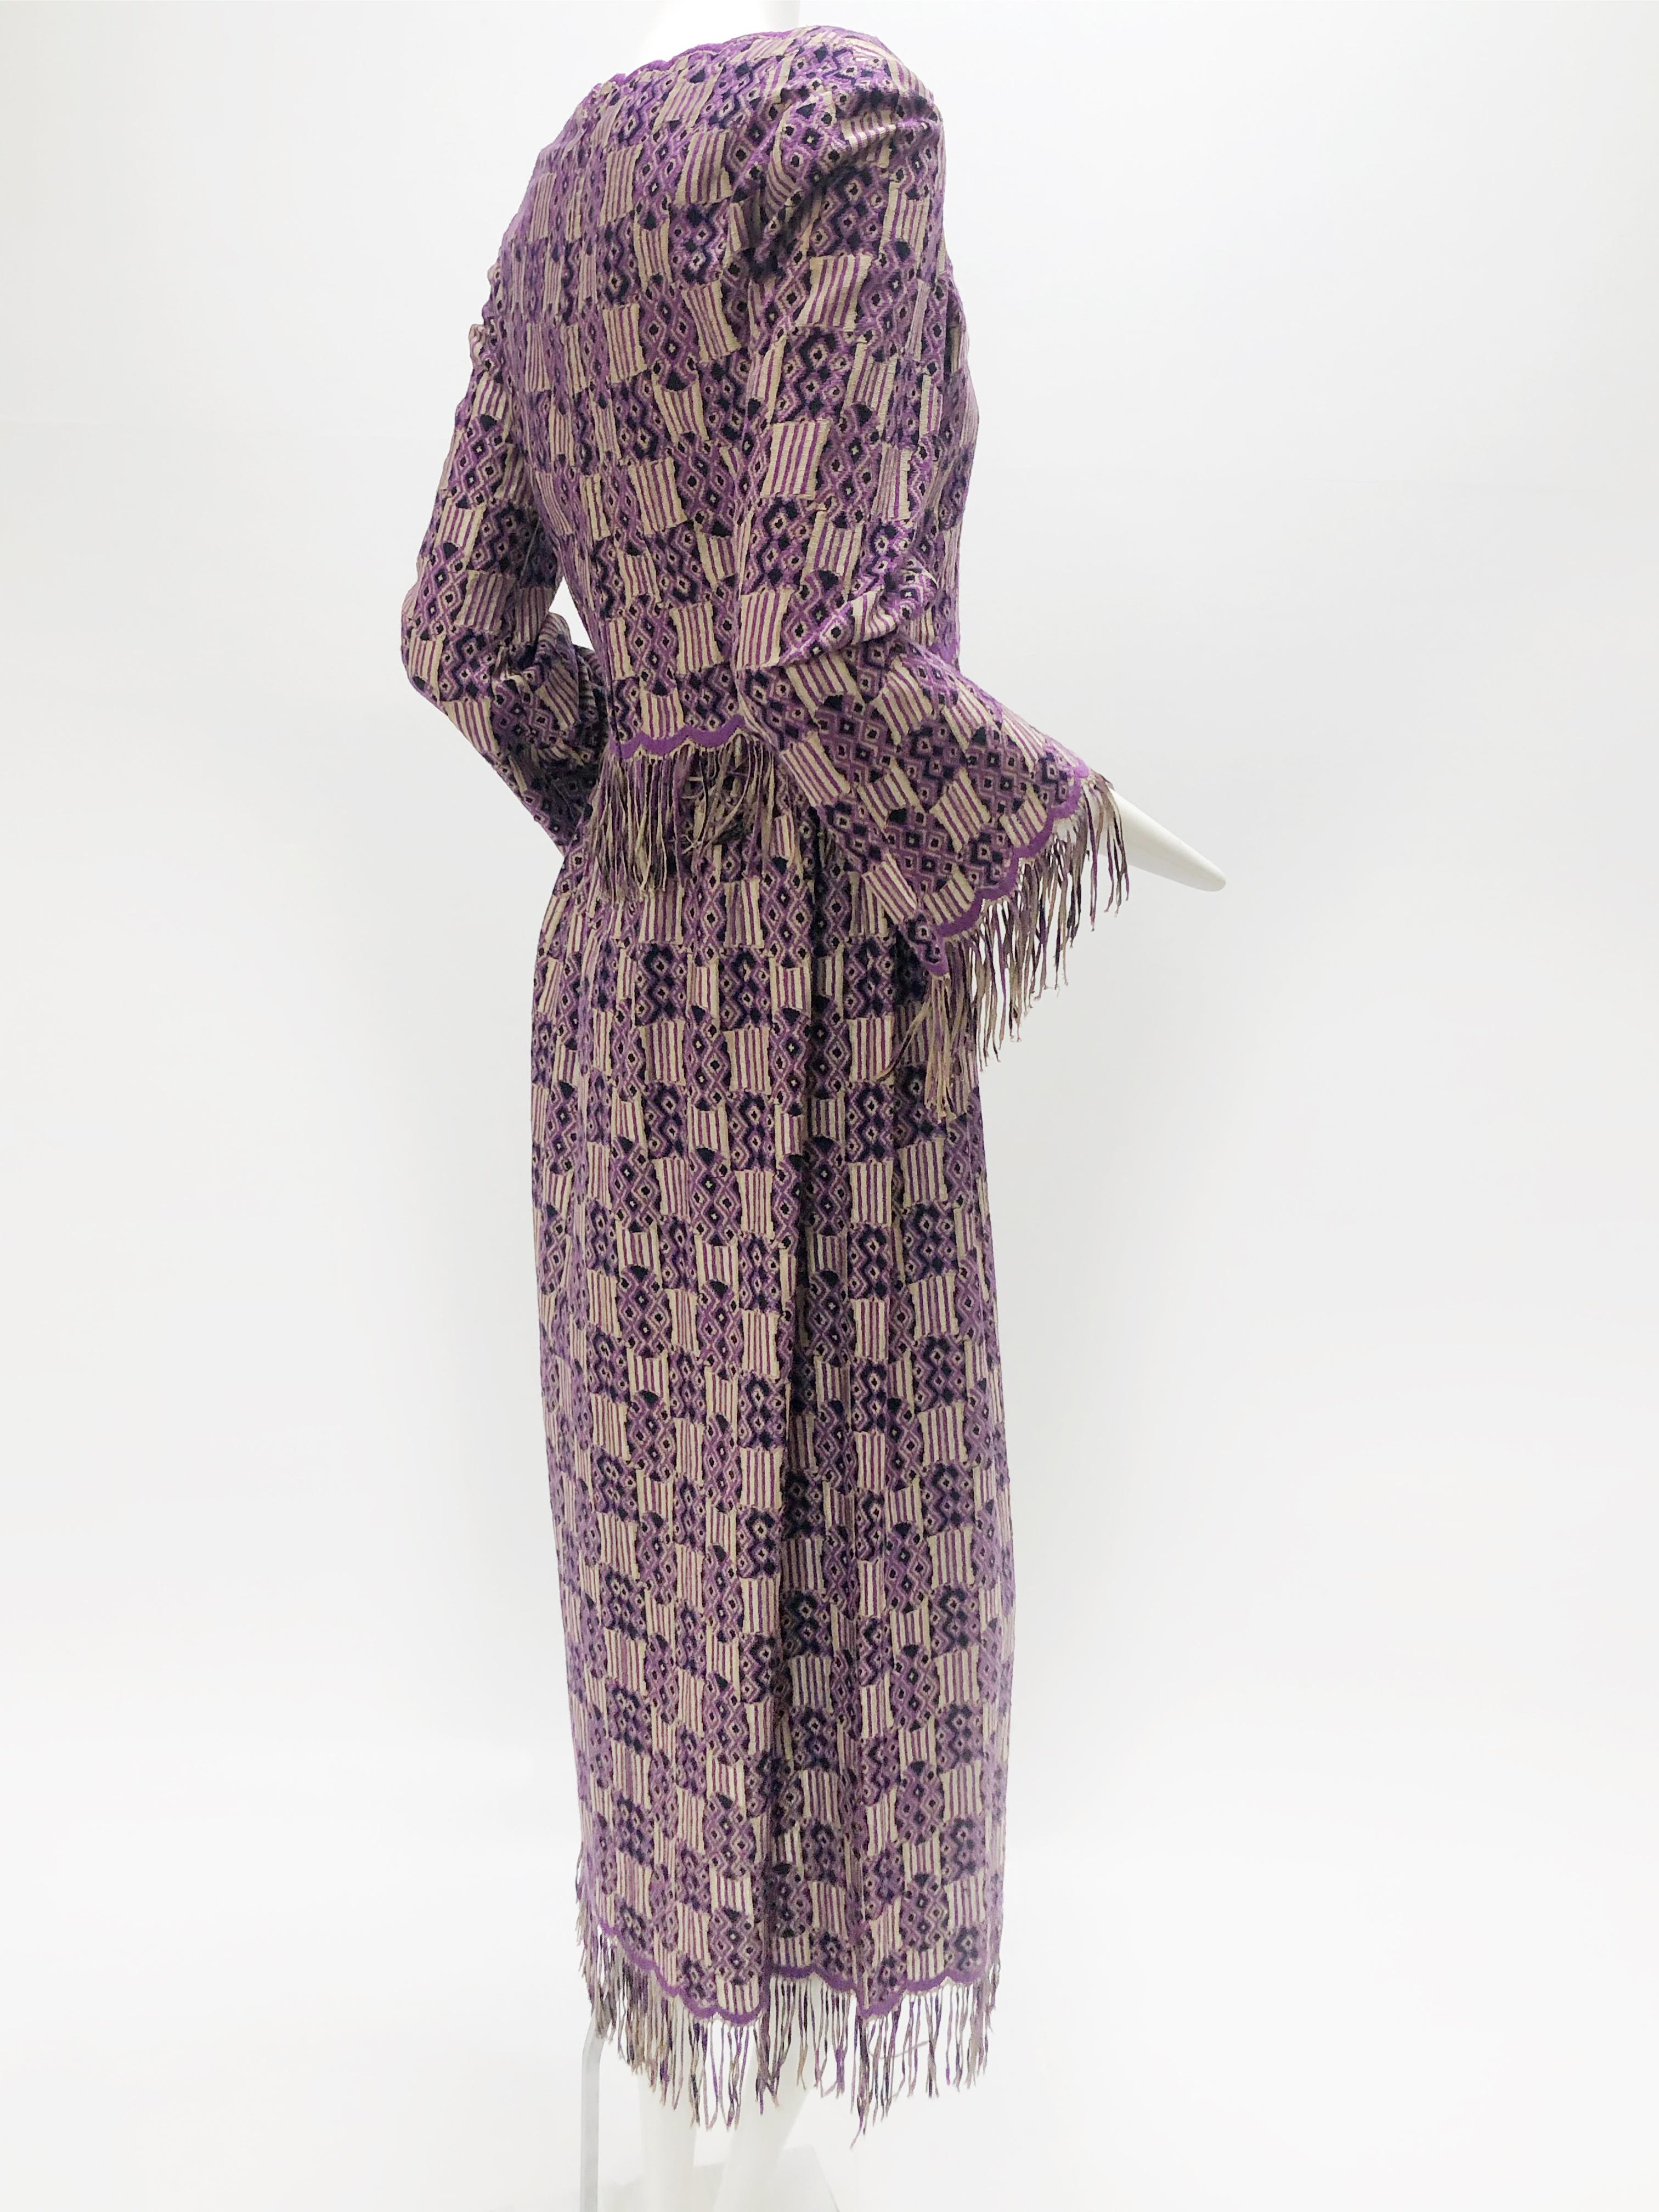 A wonderful late 1960s Christian Dior ethnic-inspired purple, black and tan light-weight knit maxi dress with free floating top overlay, scalloped and fringed sleeves, midriff and hem. Zippered back Size 6. Two pieces worn together. 